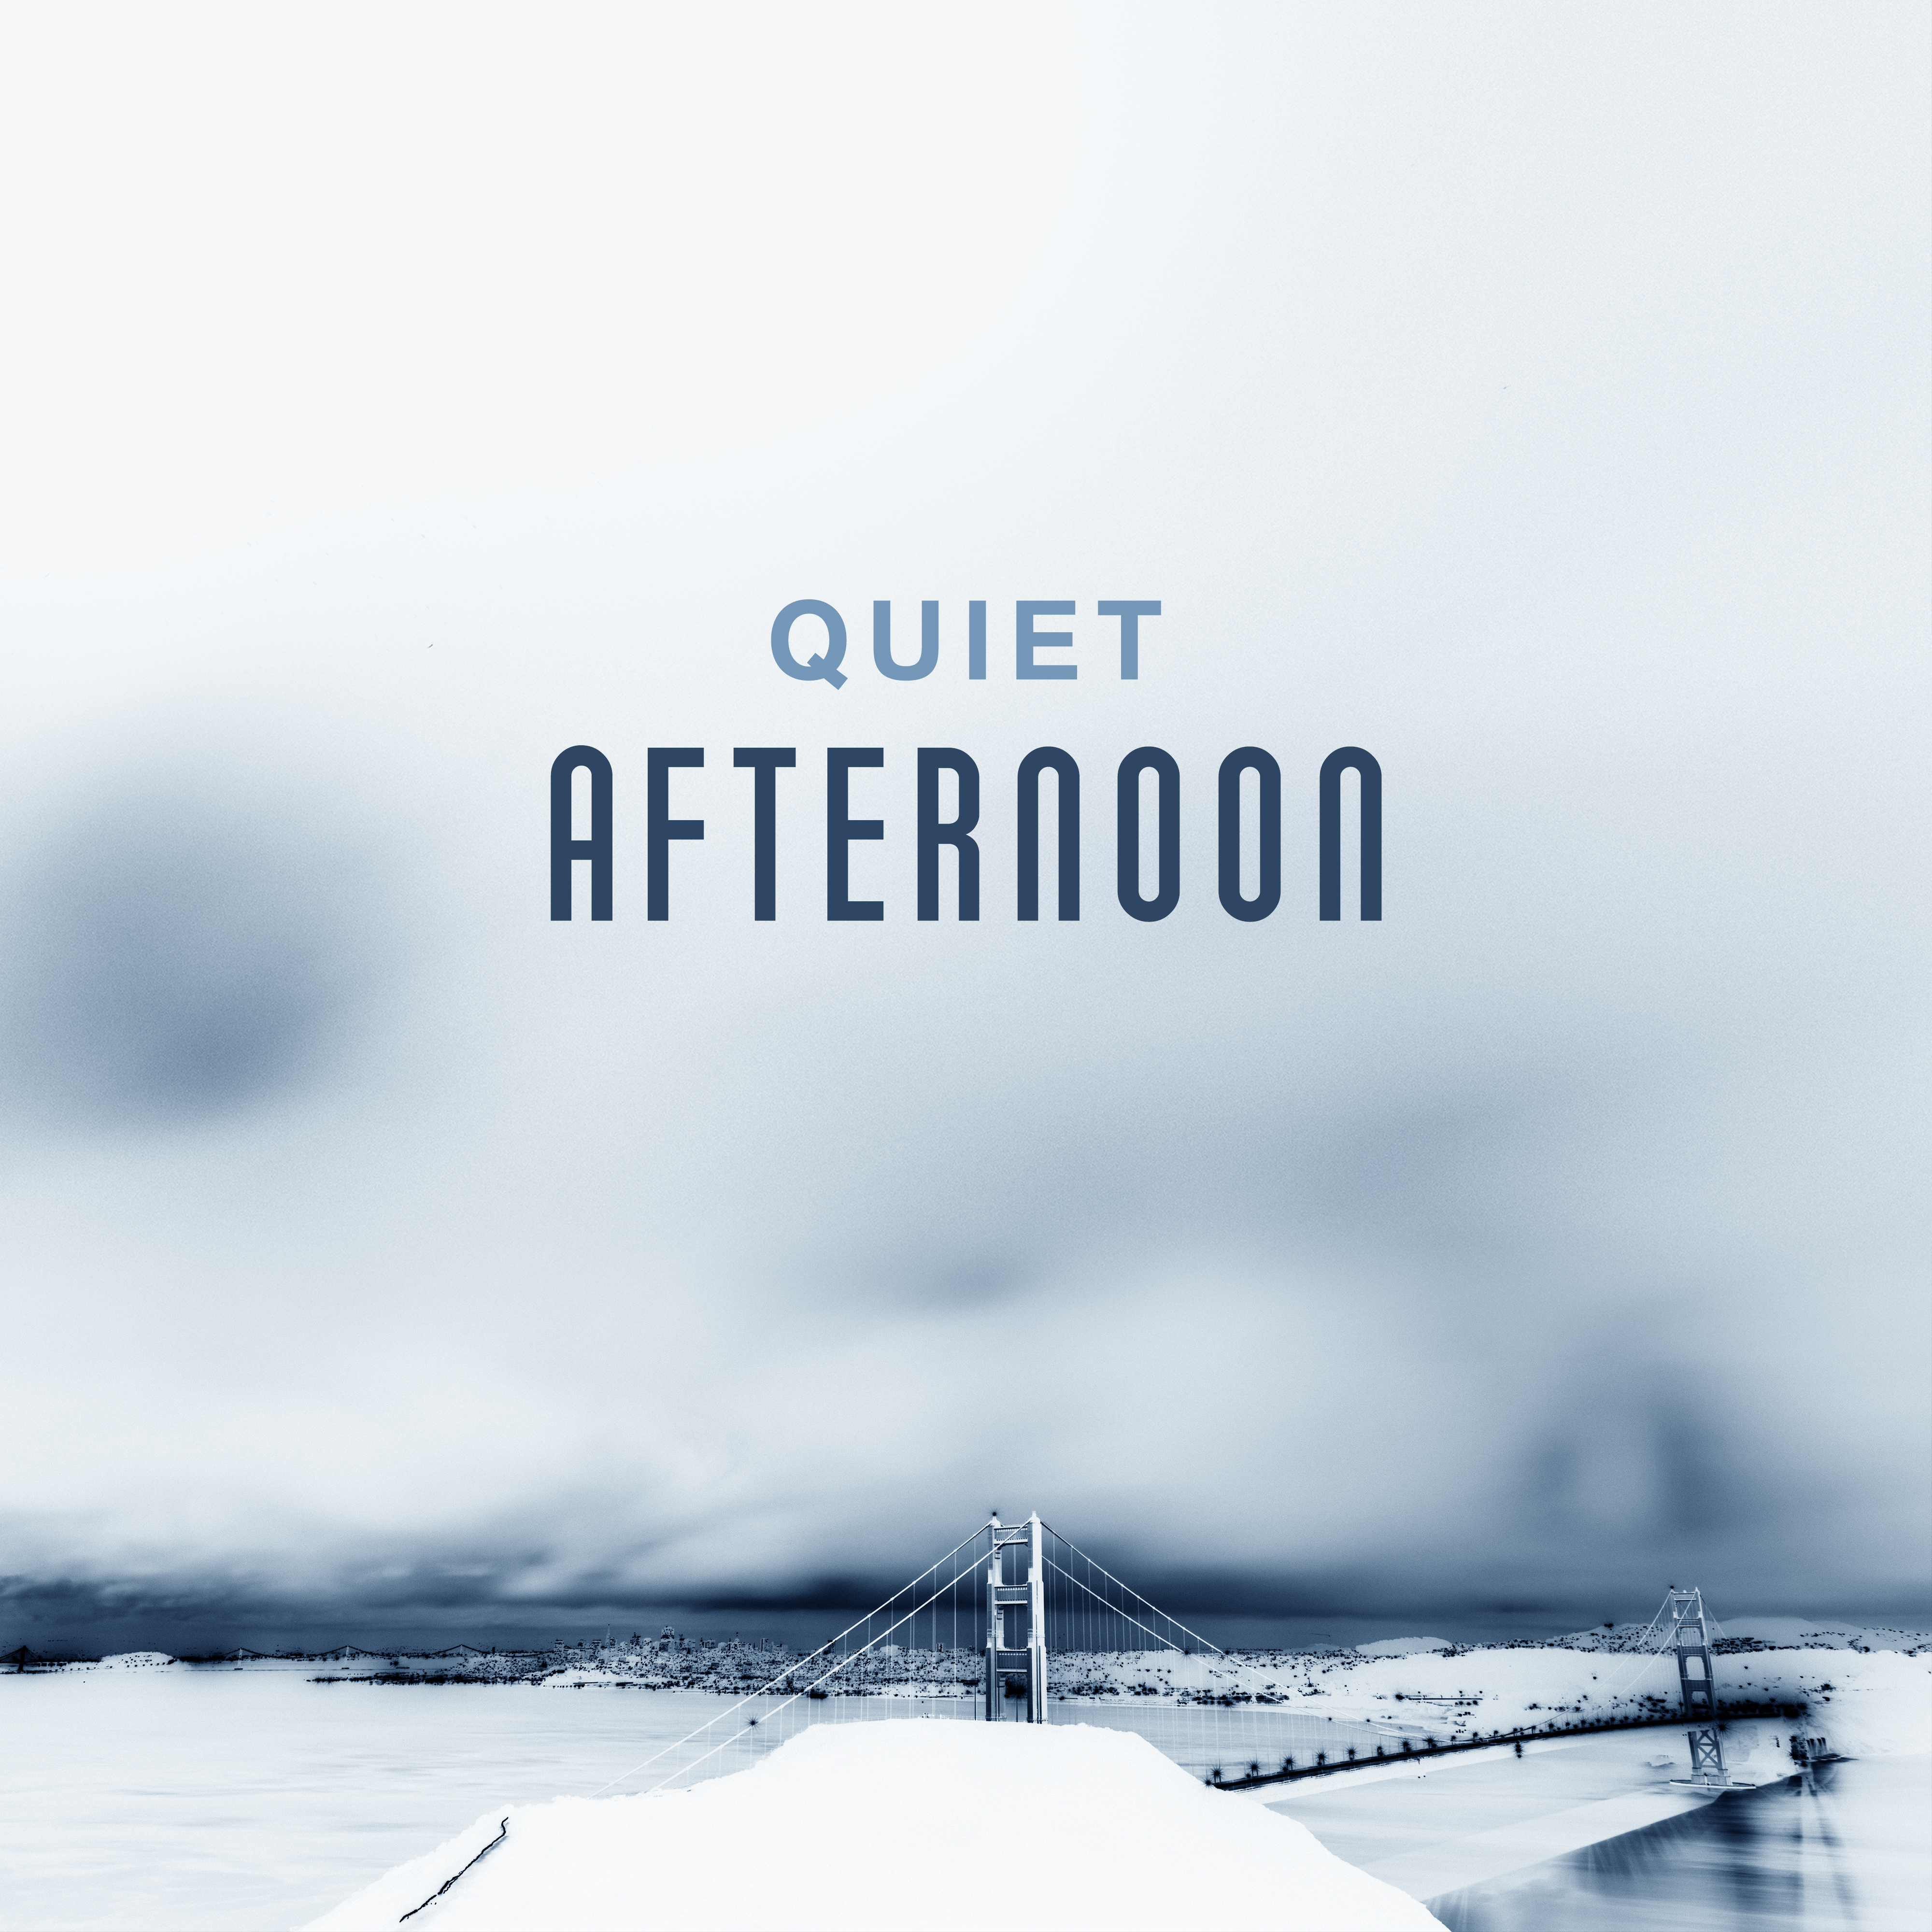 Quiet Afternoon – Jazz Cafe, Best Smooth Jazz for Relaxation, Restaurant Music, Deep Rest, Family Dinner